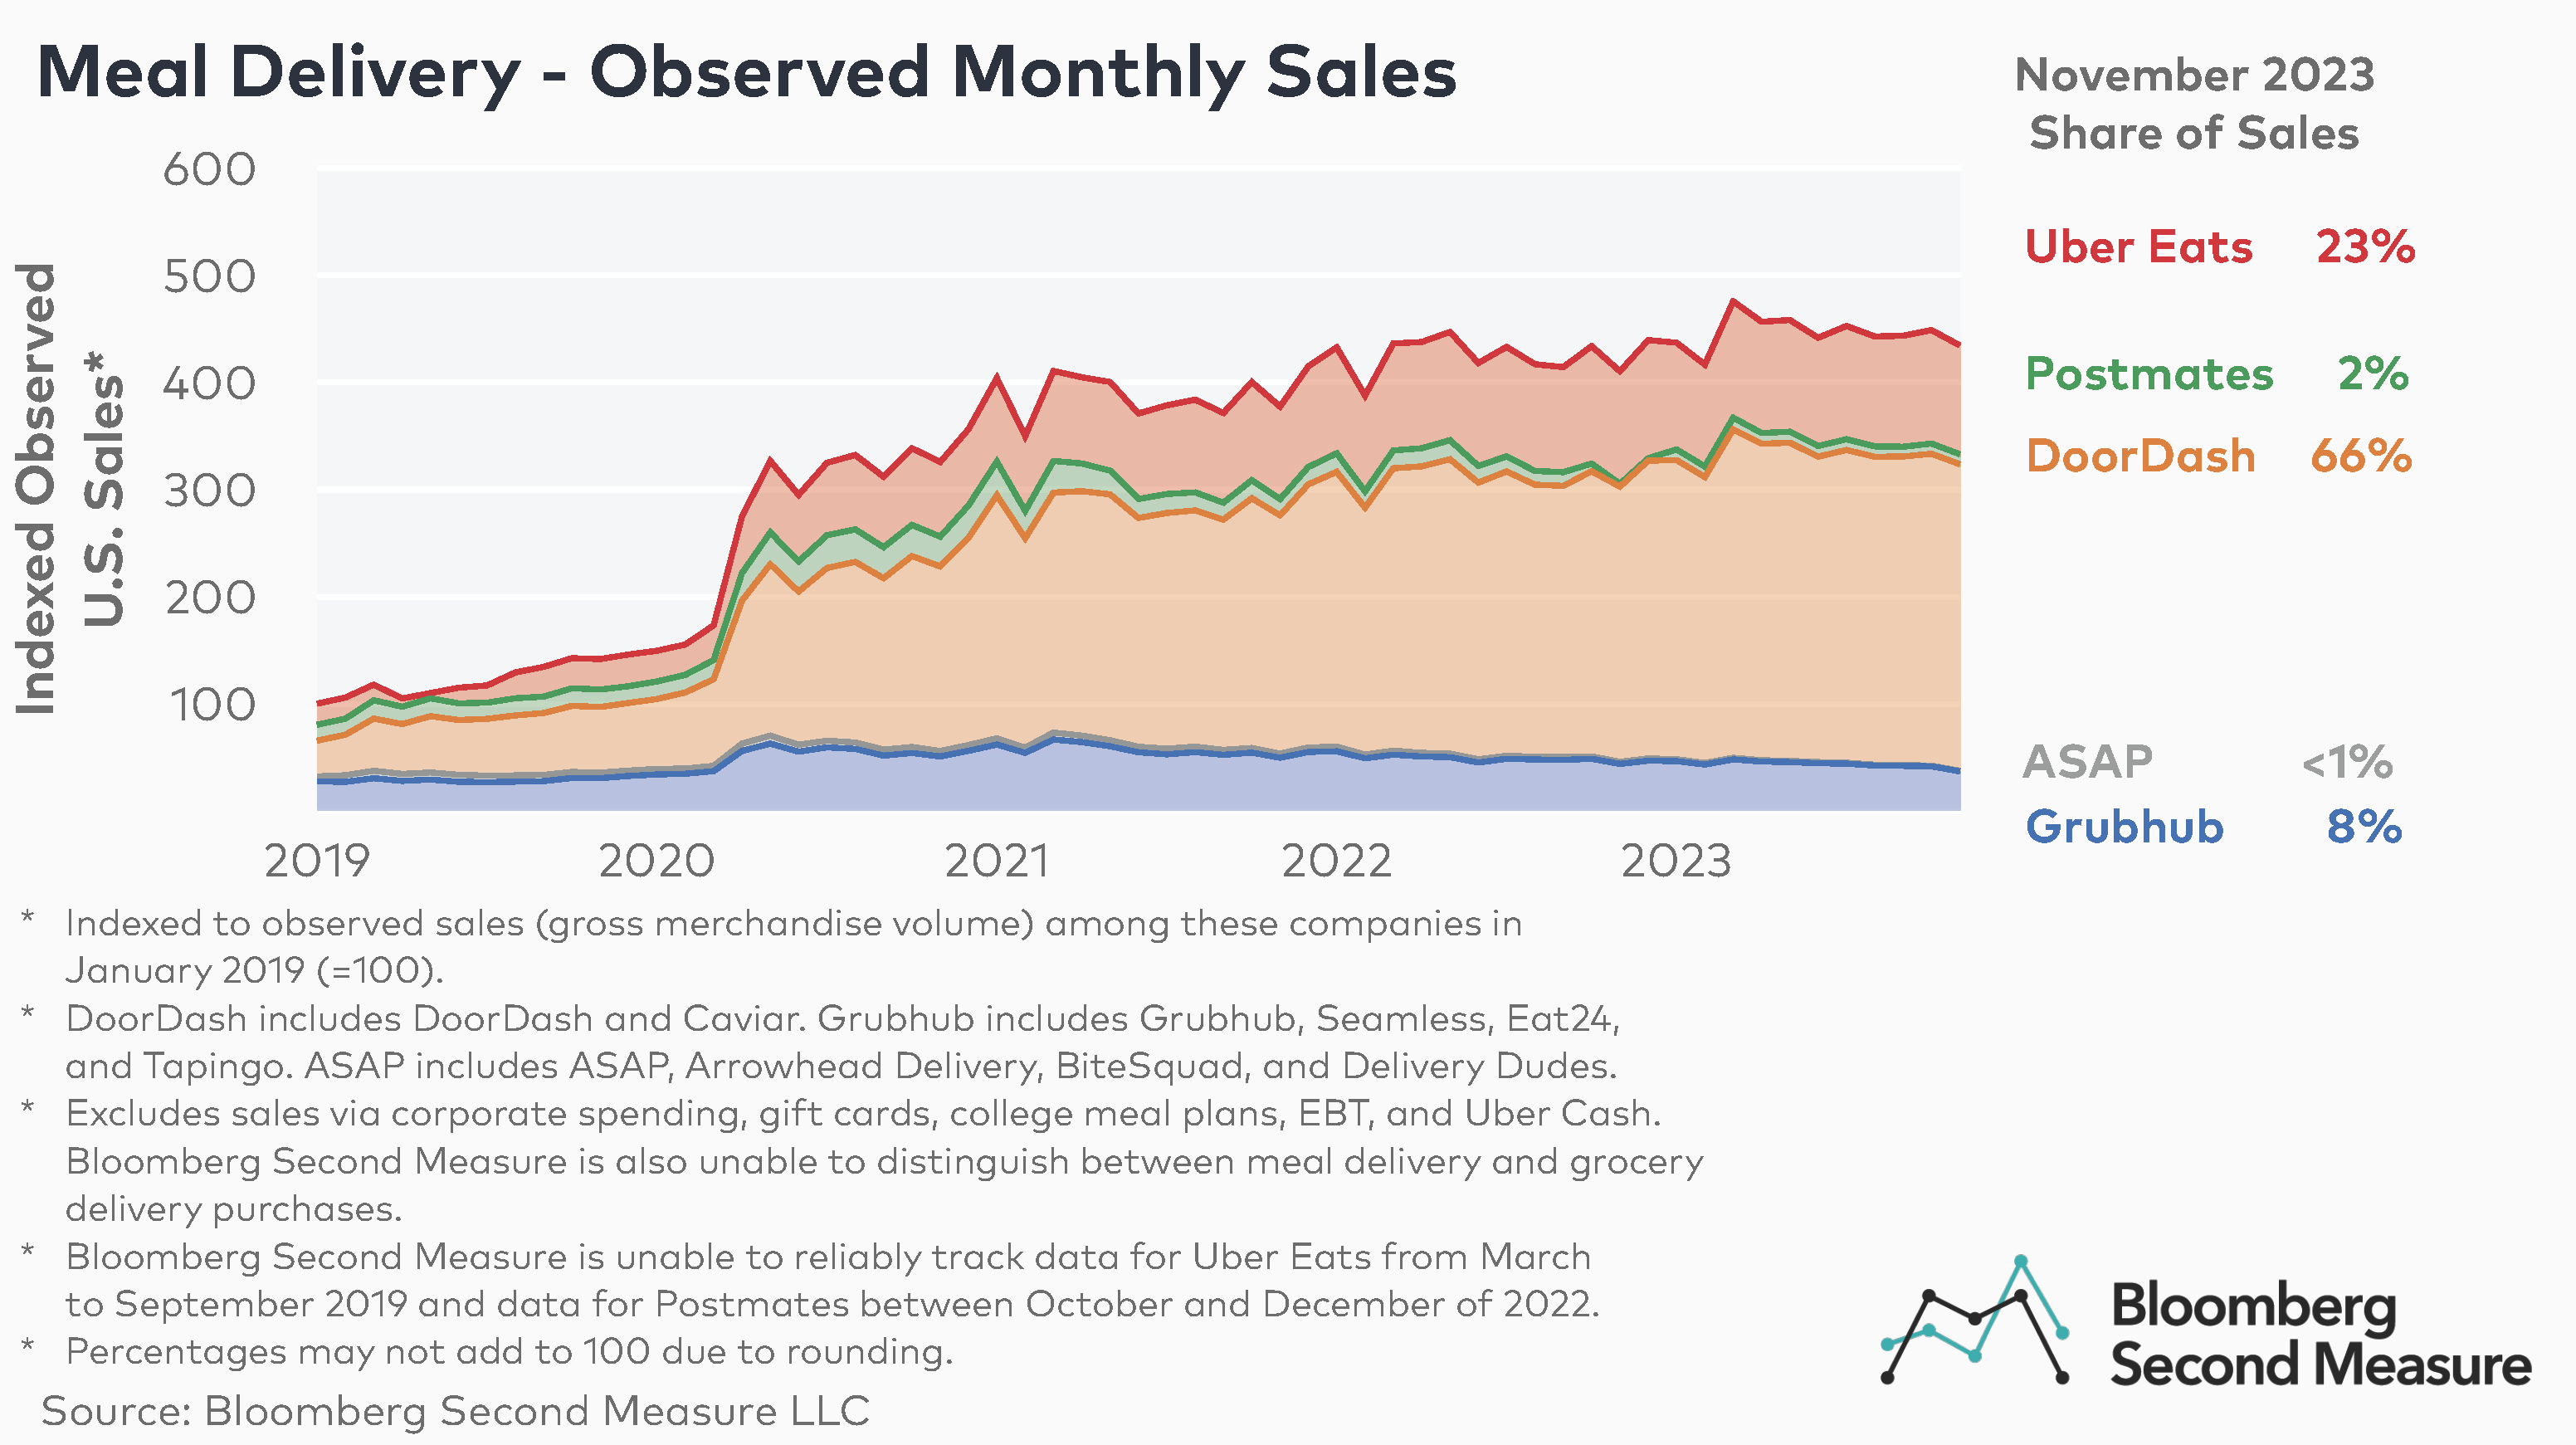 https://secondmeasure.com/wp-content/uploads/2023/12/EG-mealdelivery-charts-November-2023-1.numbers-indexed-sales-and-share.png